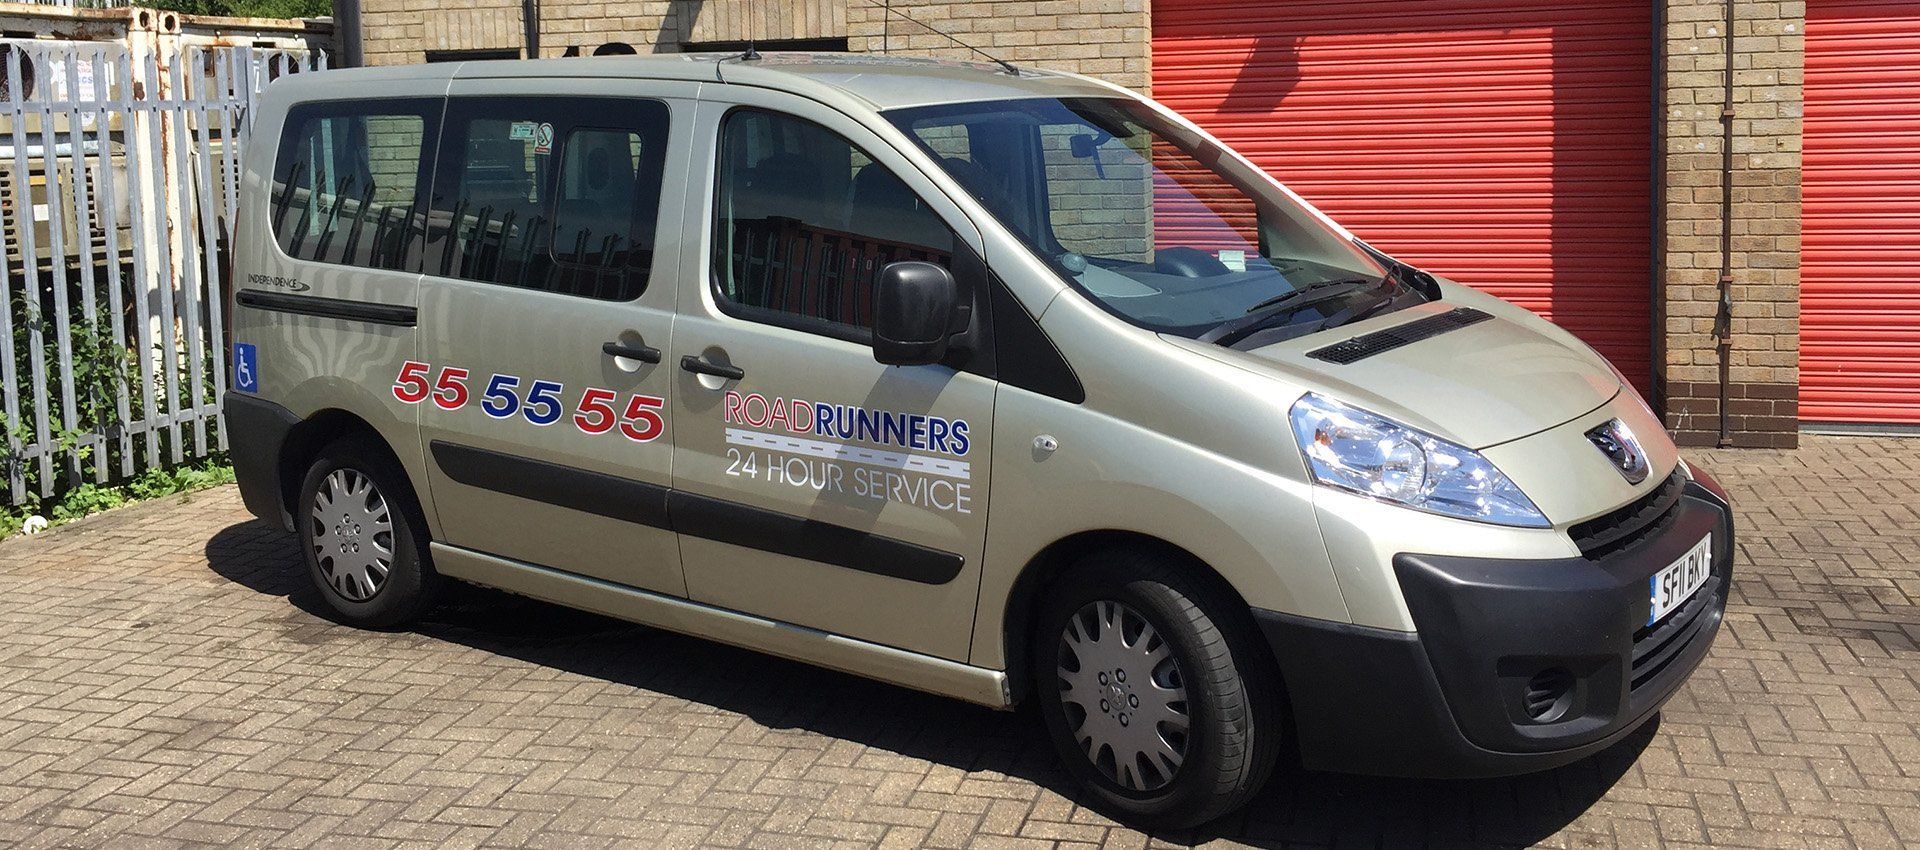 RoadRunners Taxis' Minibus and Wheelchair Friendly Vehicle